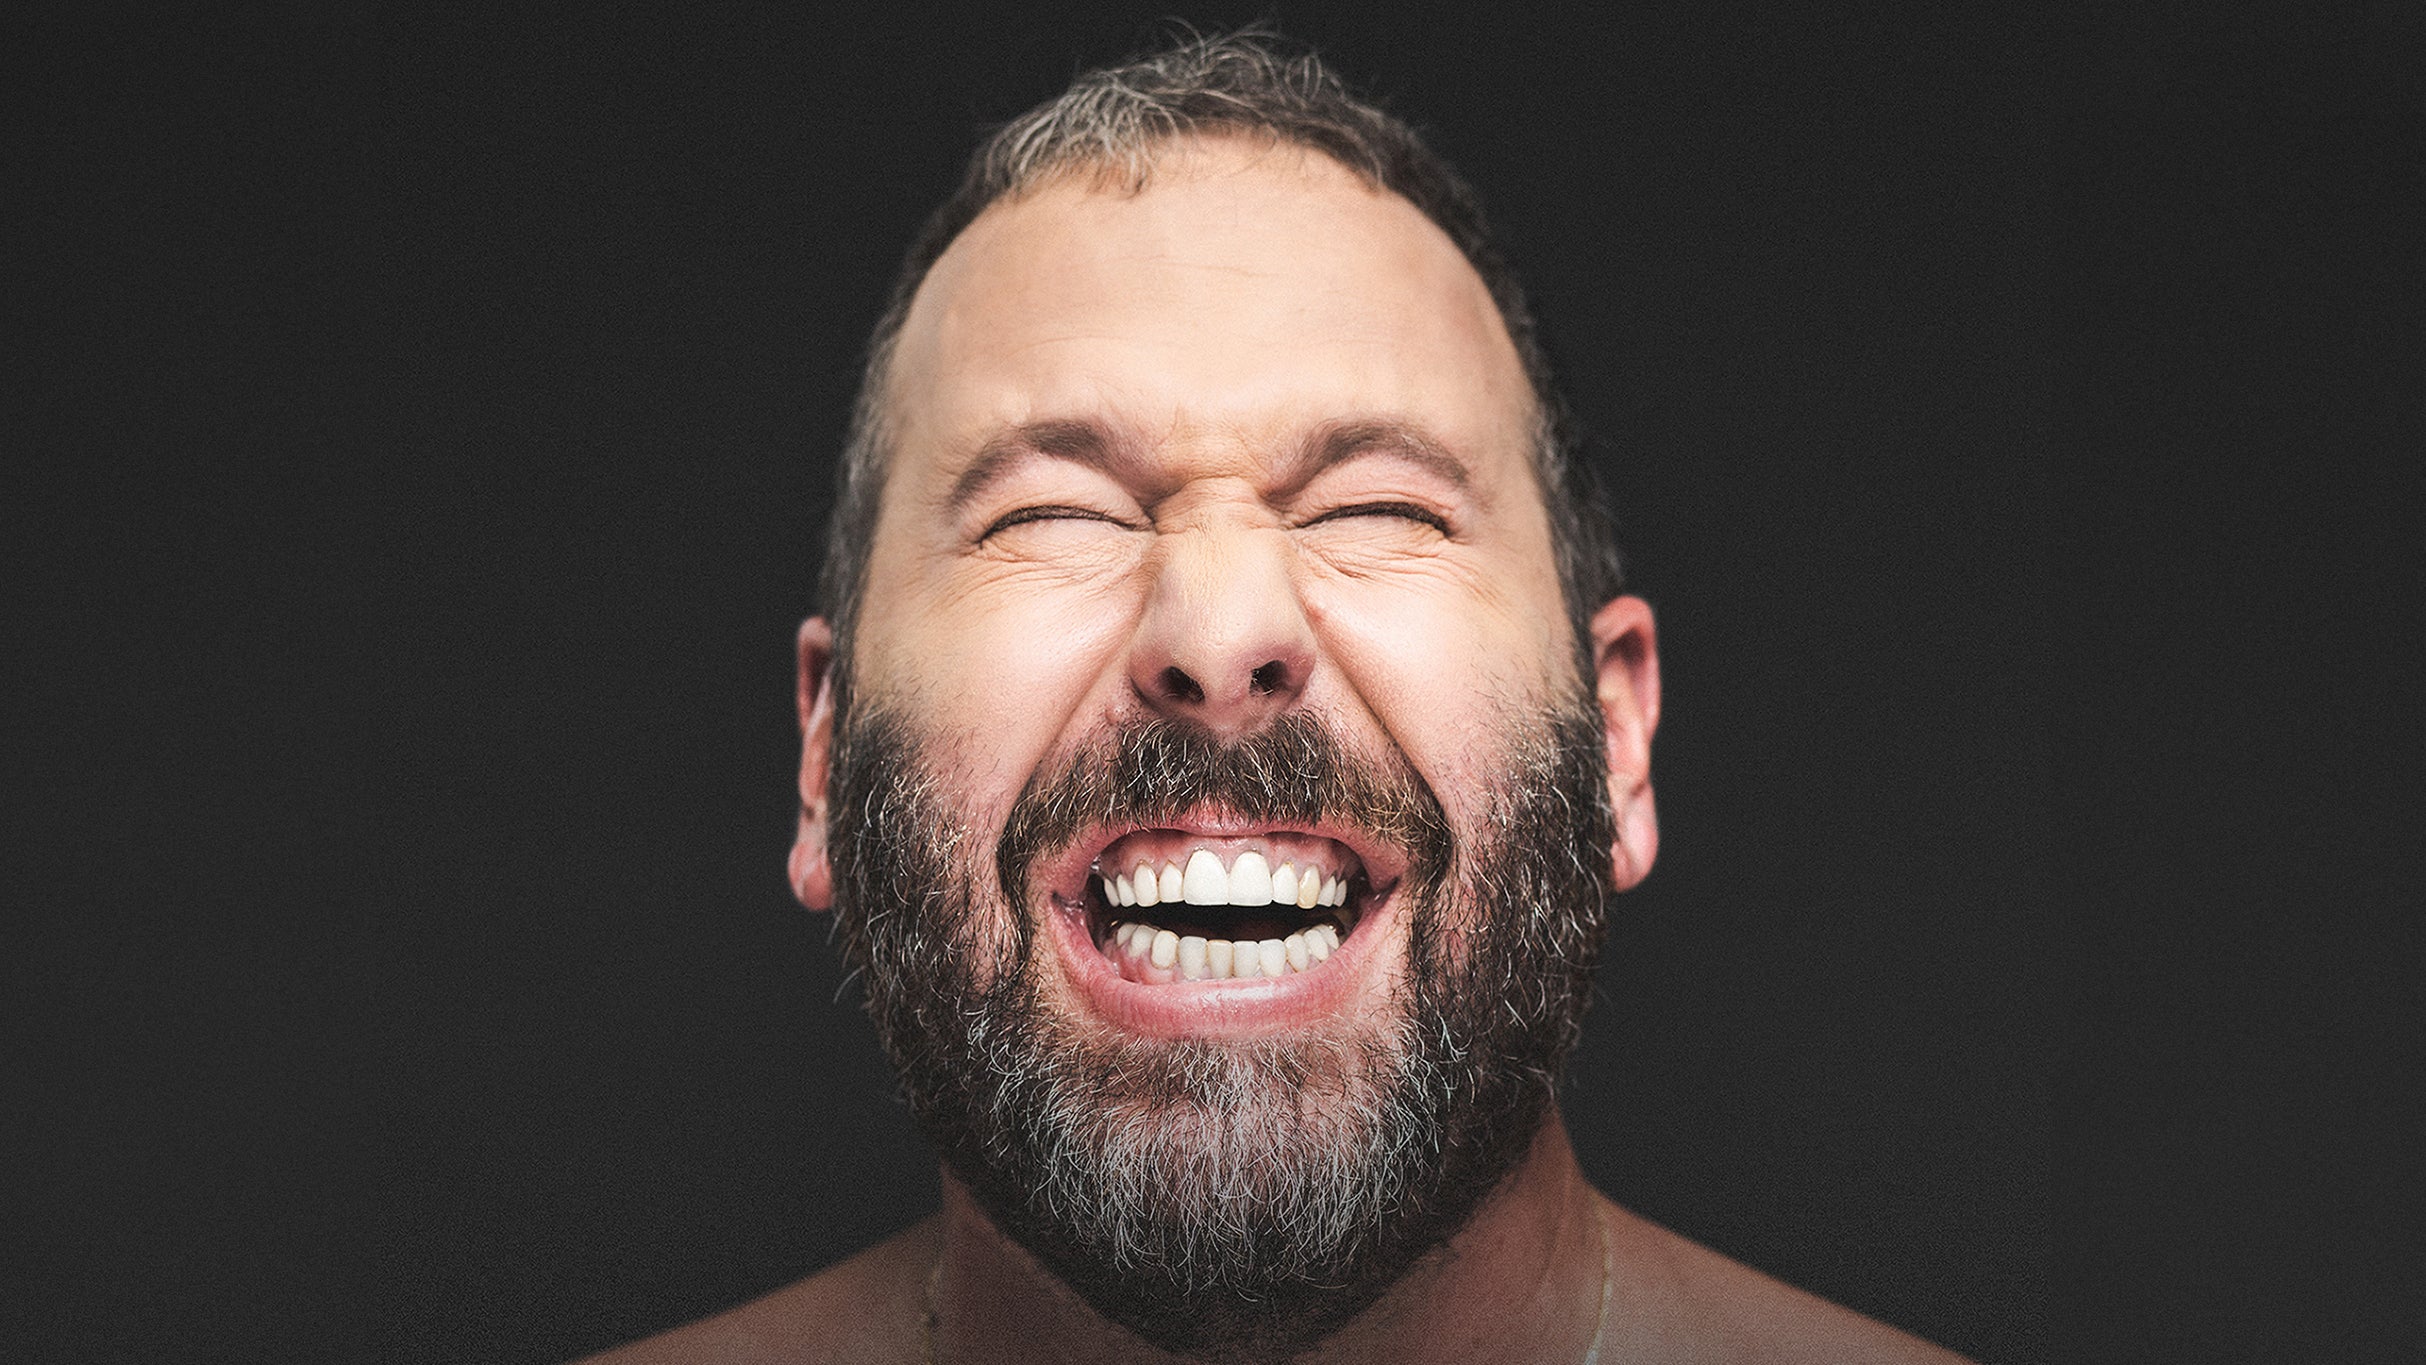 members only presale password to Bert Kreischer's Fully Loaded Comedy Festival face value tickets in Gilford